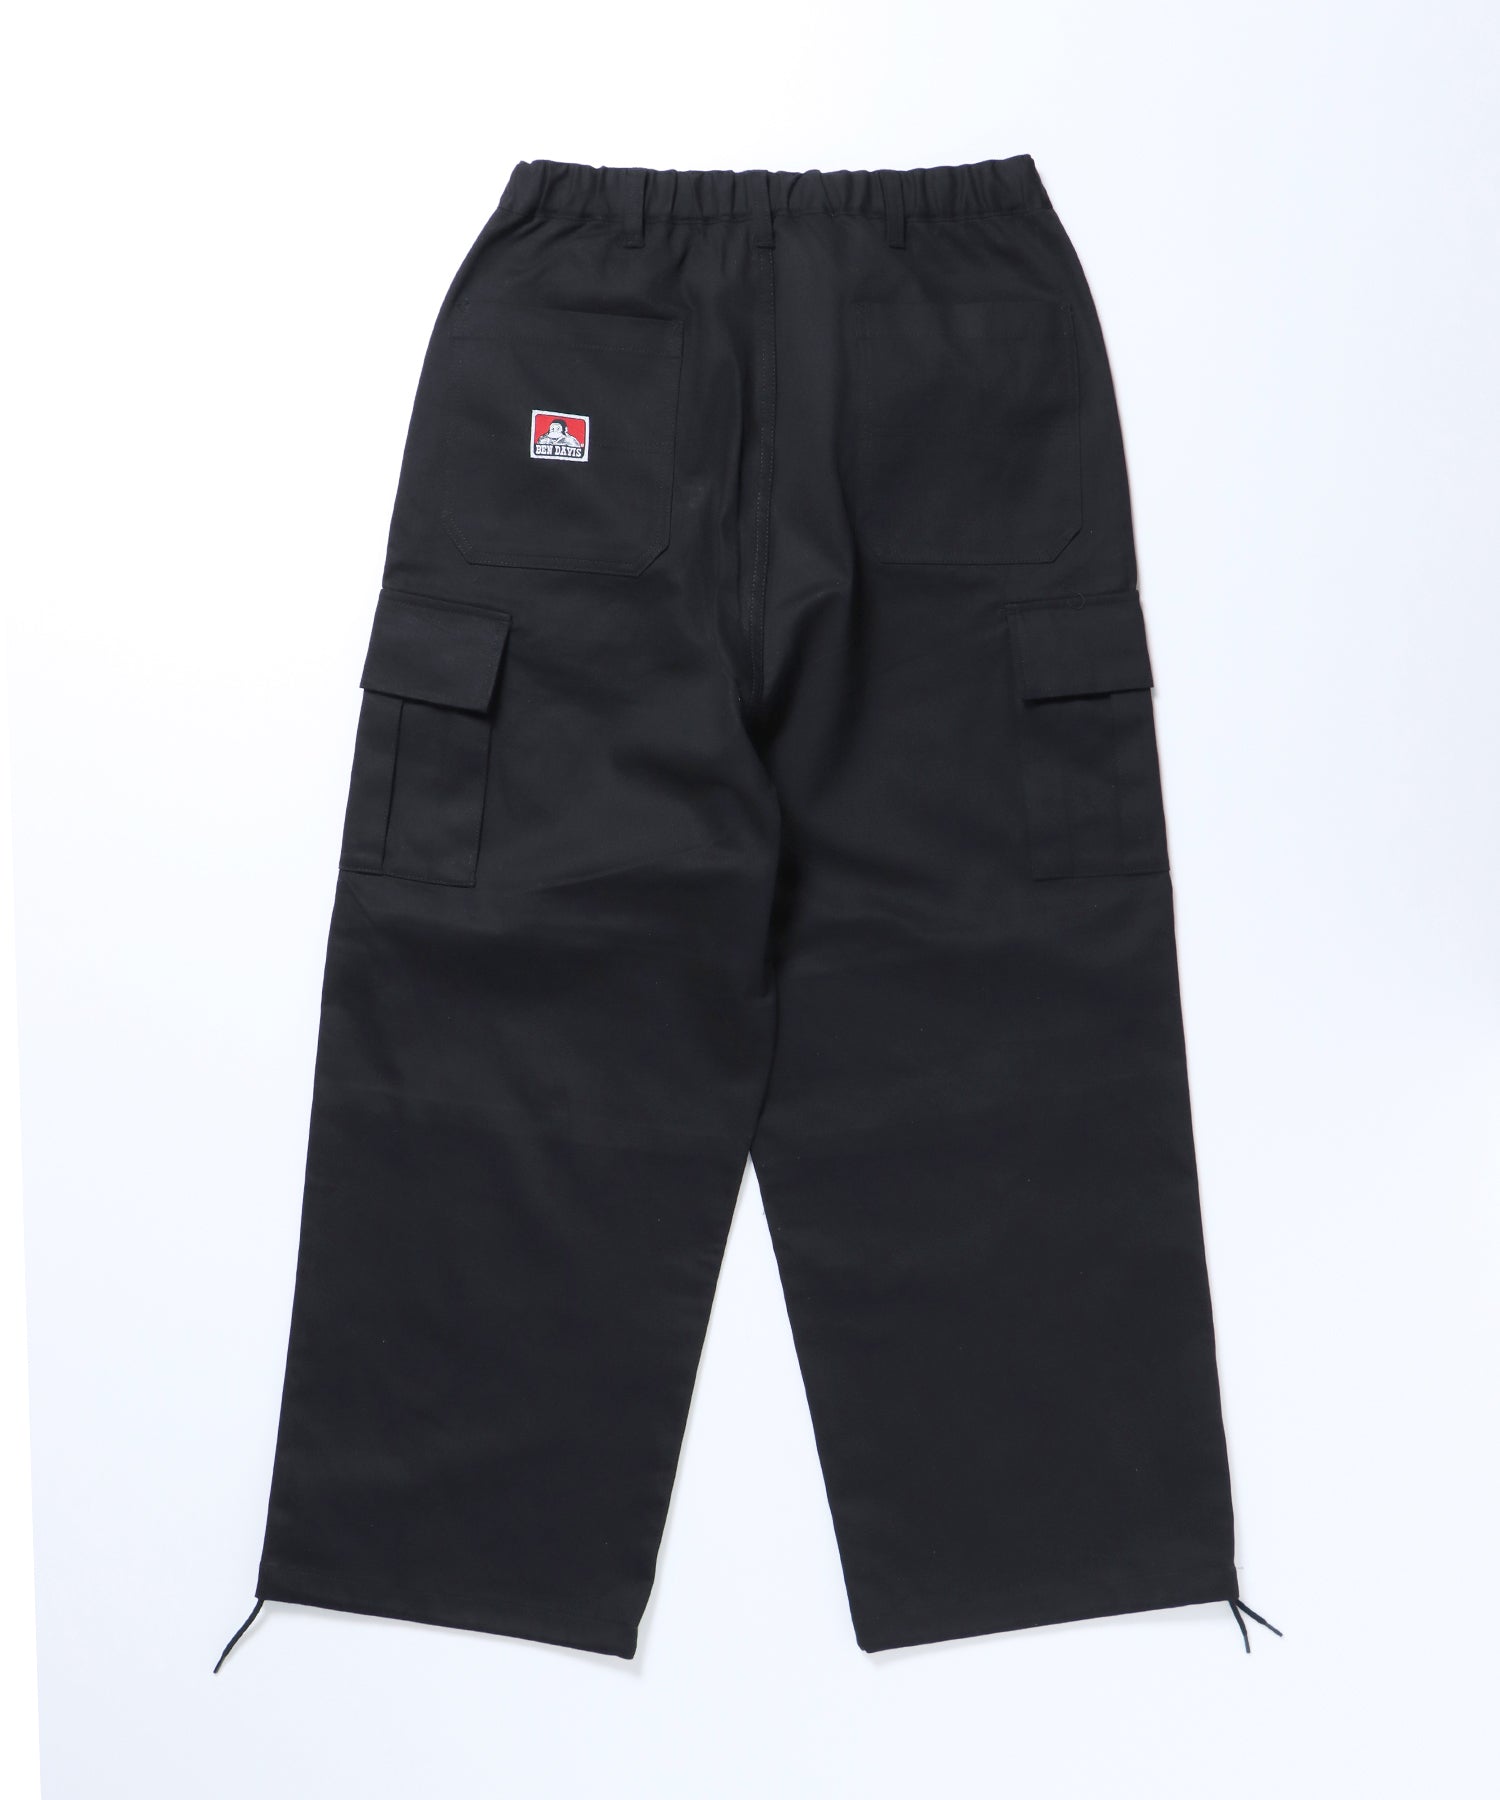 SNOW WORKERS PANTS / ルーズシルエット ワーク カラースノーパンツ 柄80